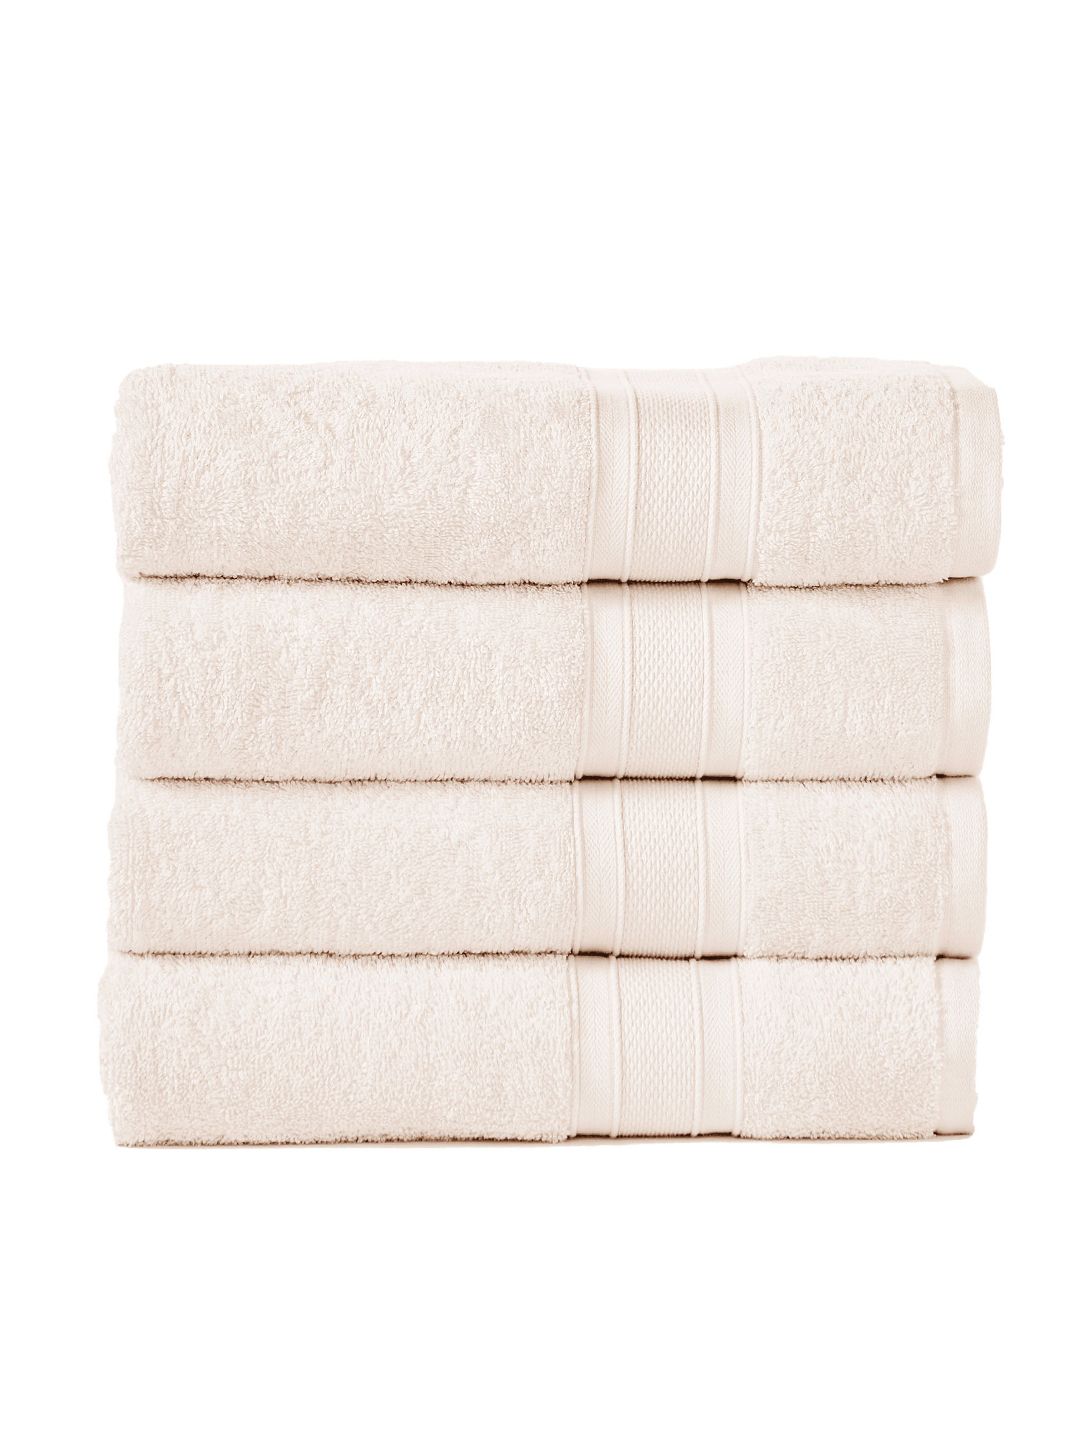 Trident Set of 4 Cream-Coloured 500 GSM Striped Cotton Bath Towels Price in India